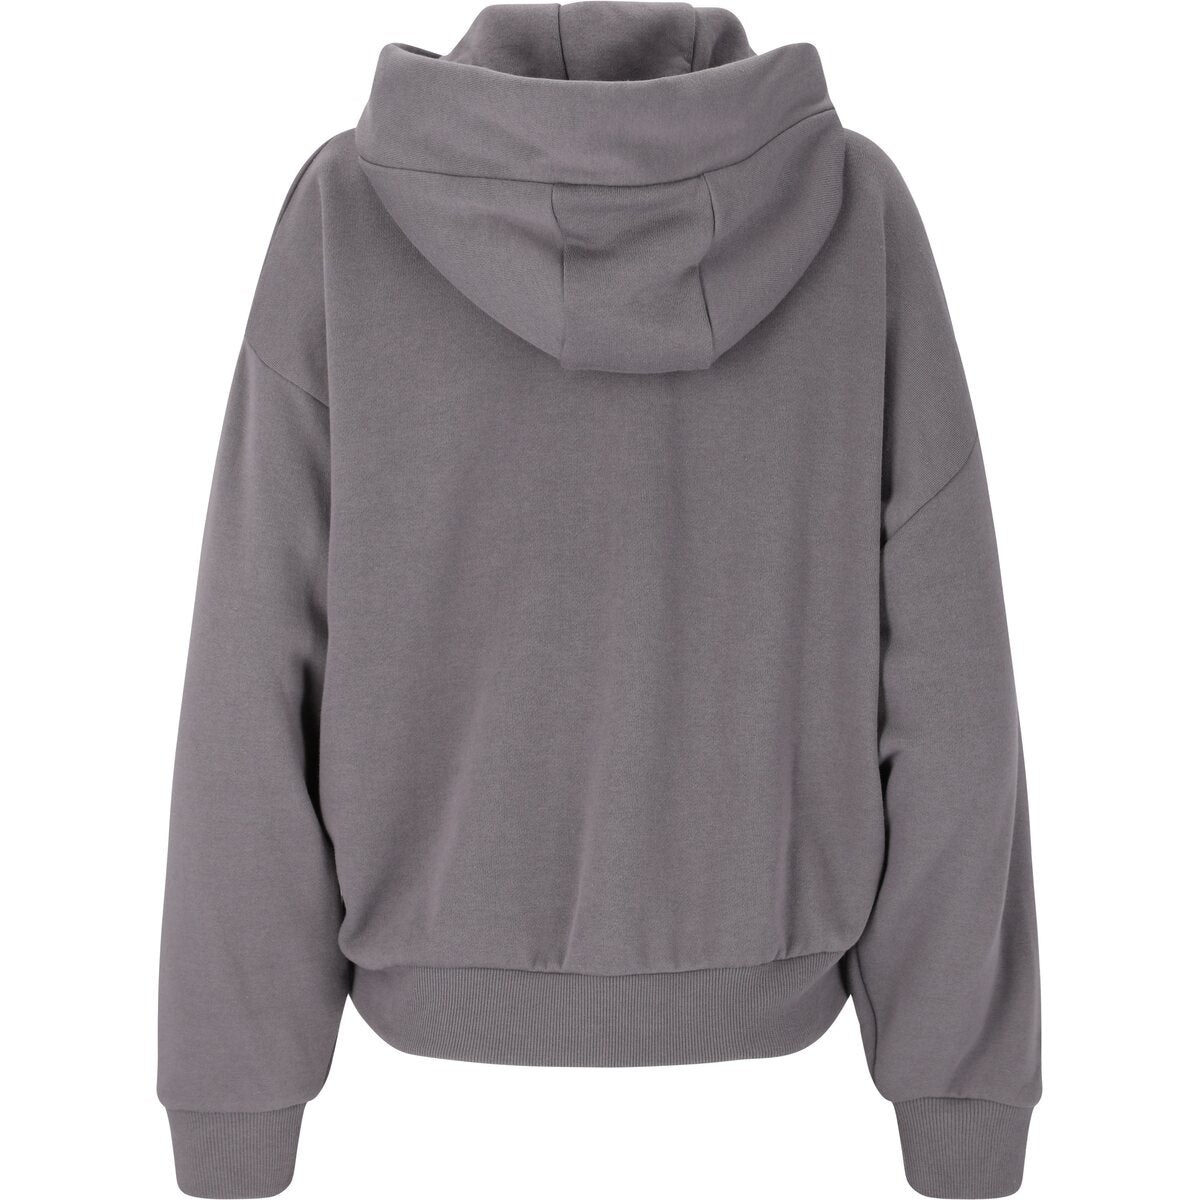 Athlecia Ruthie Womenswear Hoody 6 Shaws Department Stores